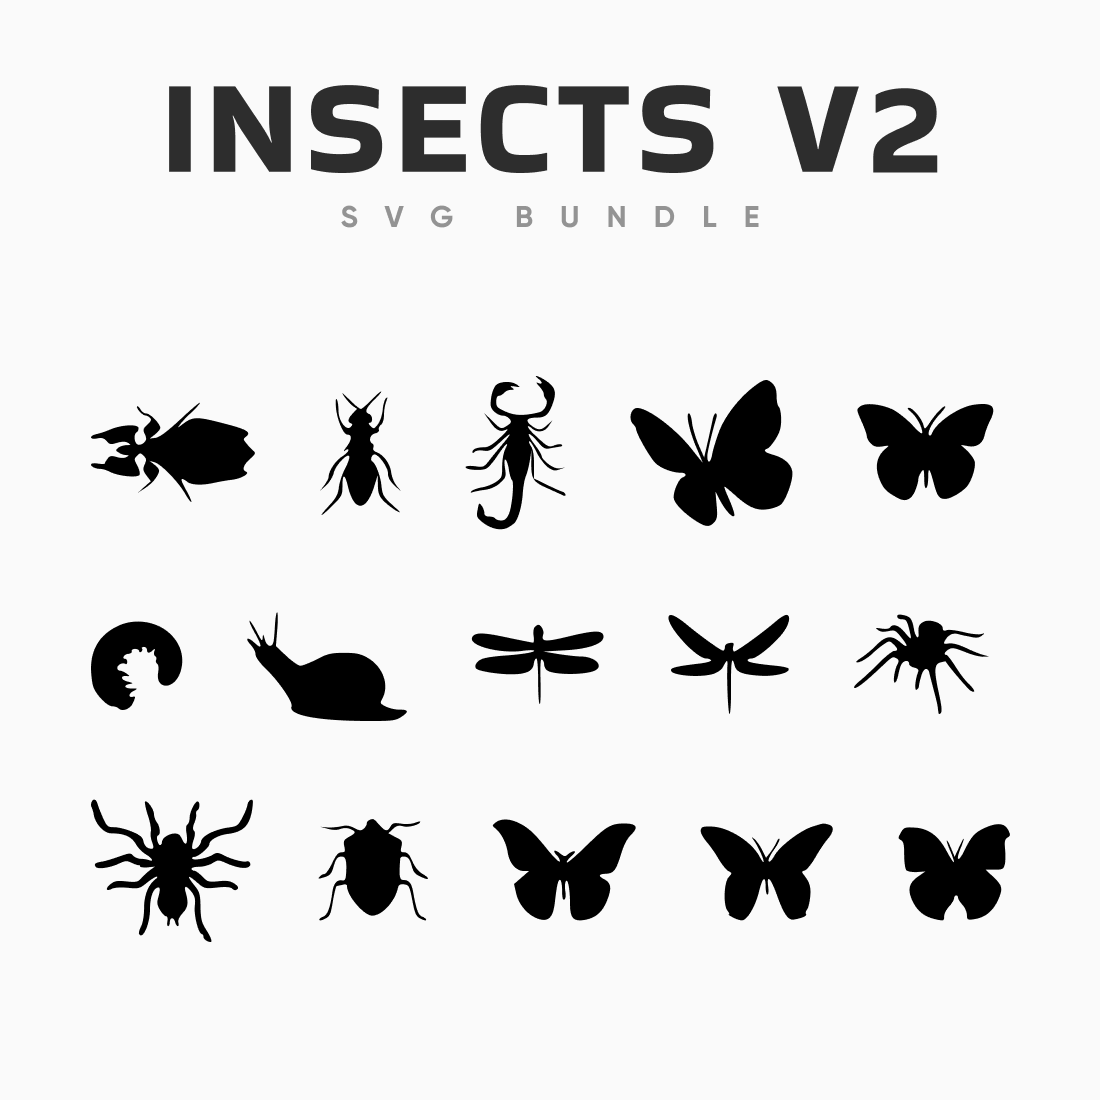 Interesting insects v2 SVG.